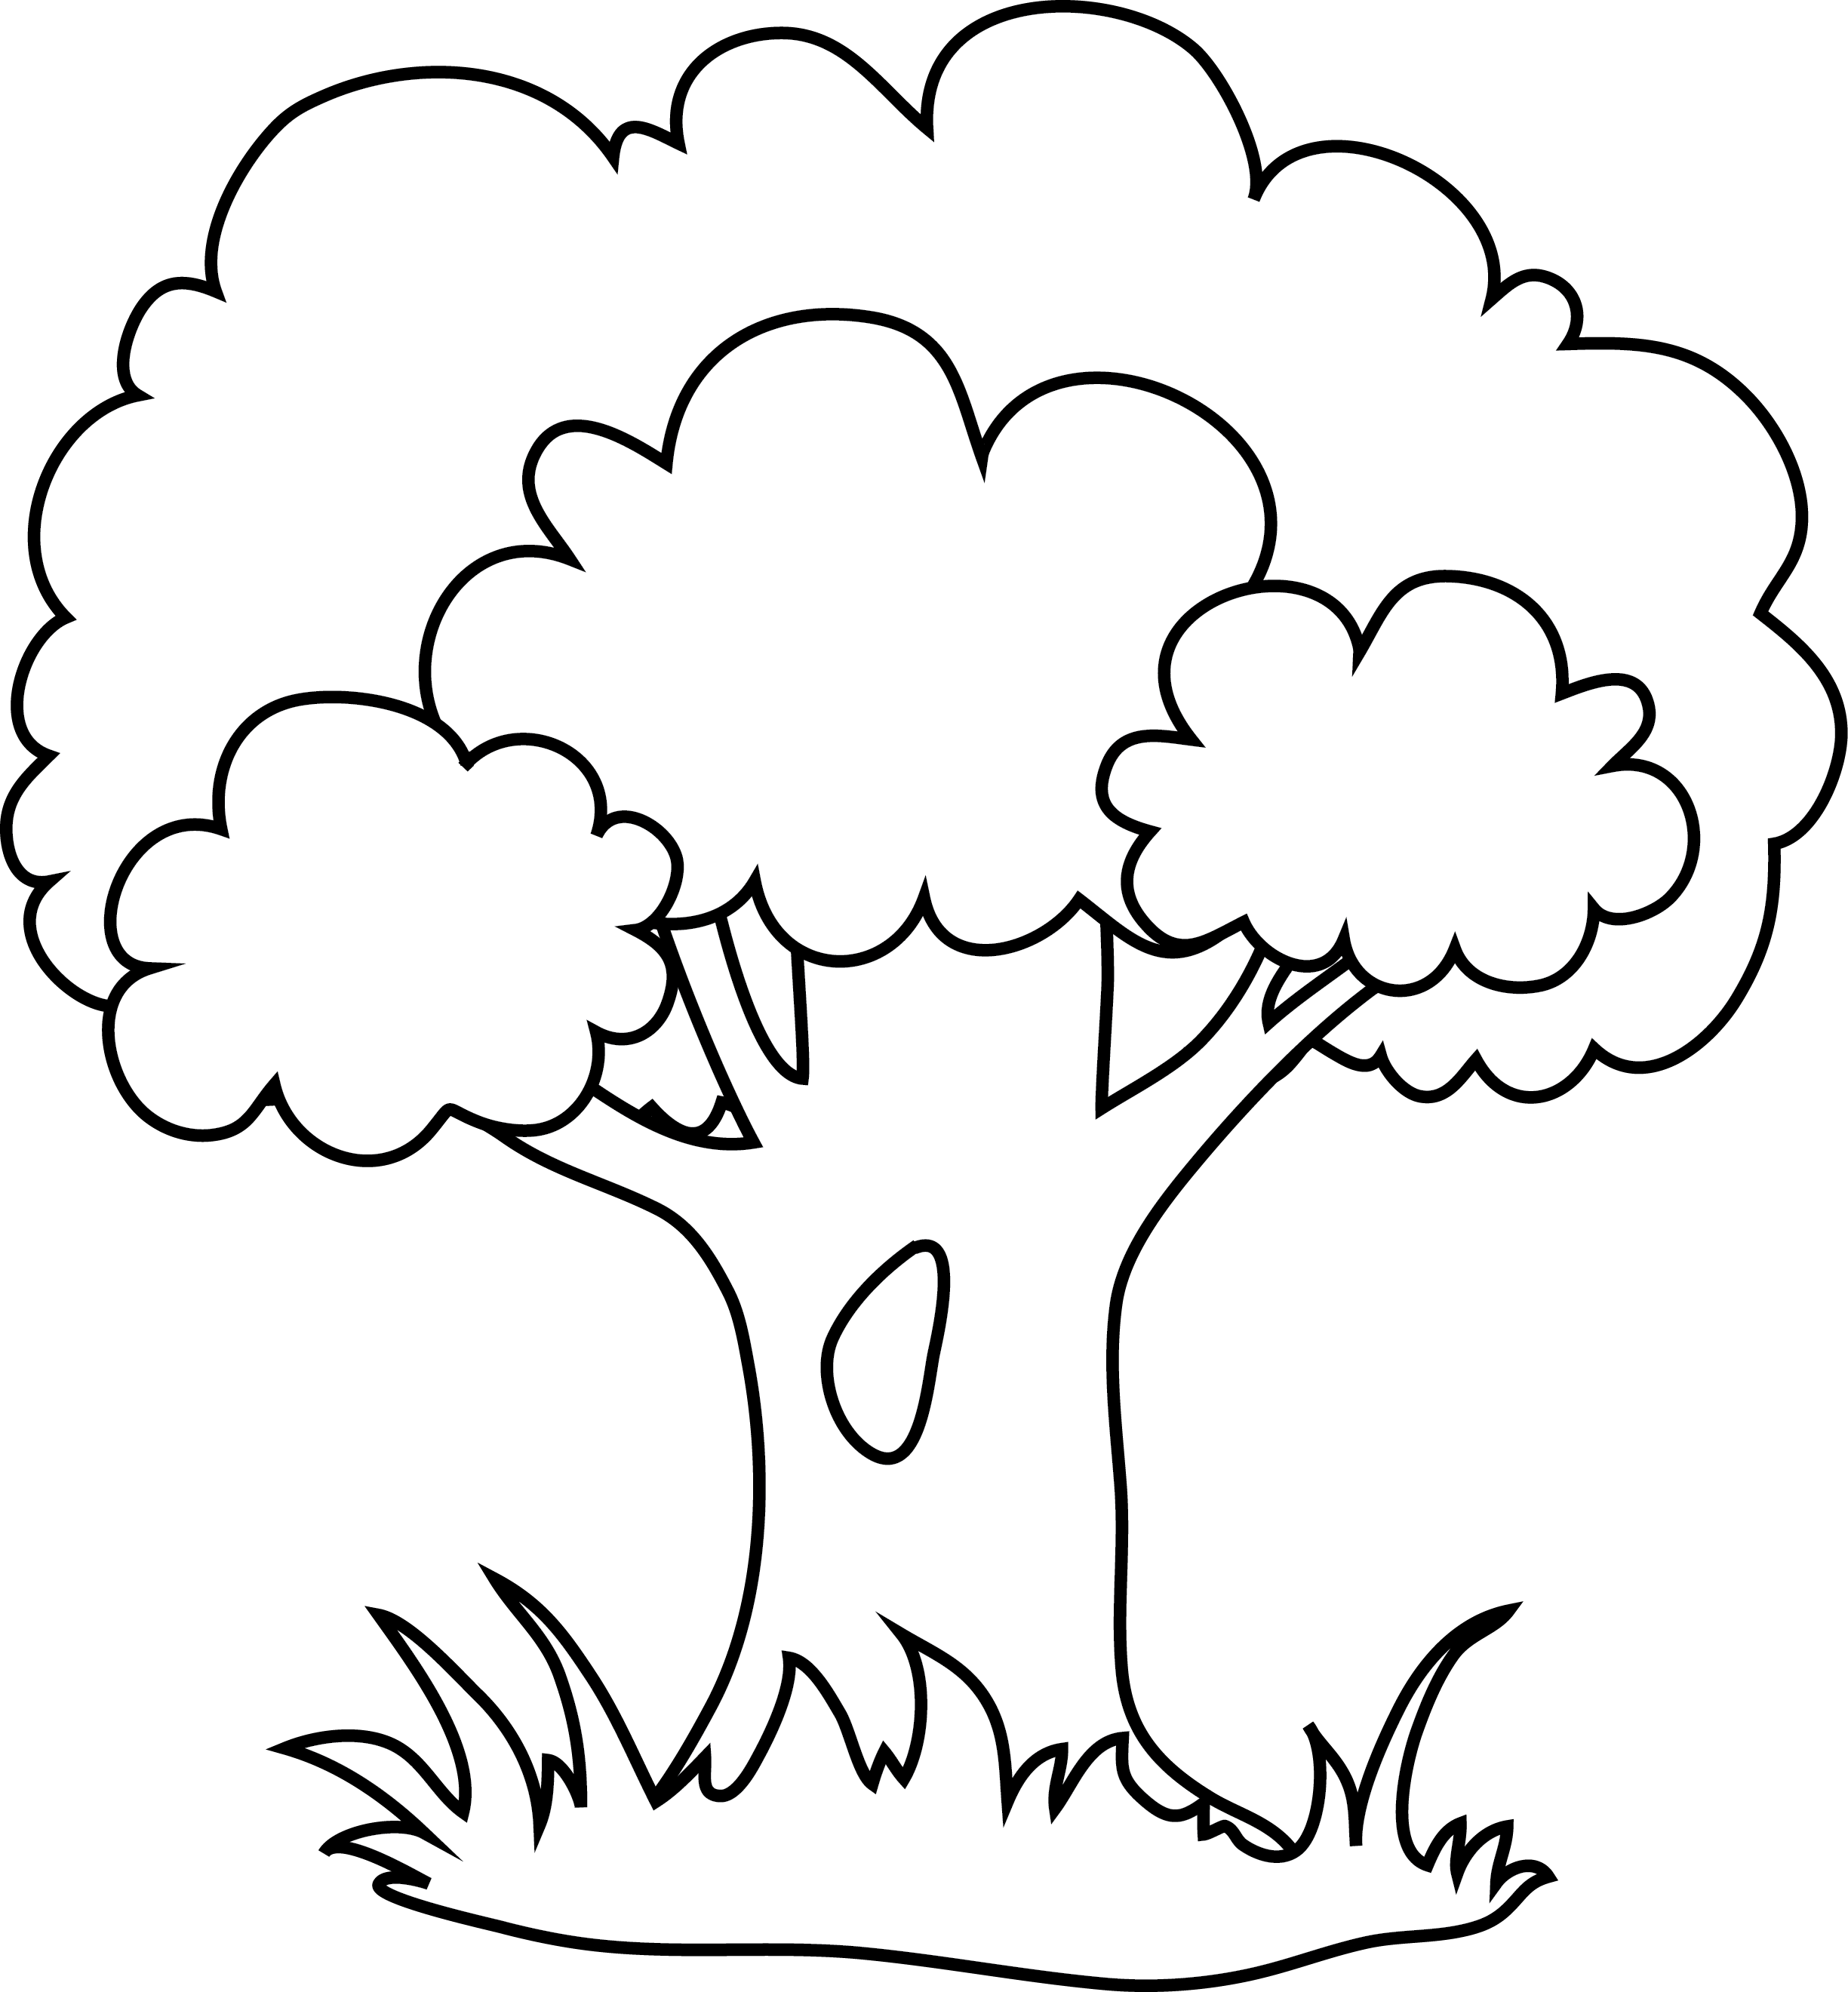 clip art line drawing of a tree - photo #49